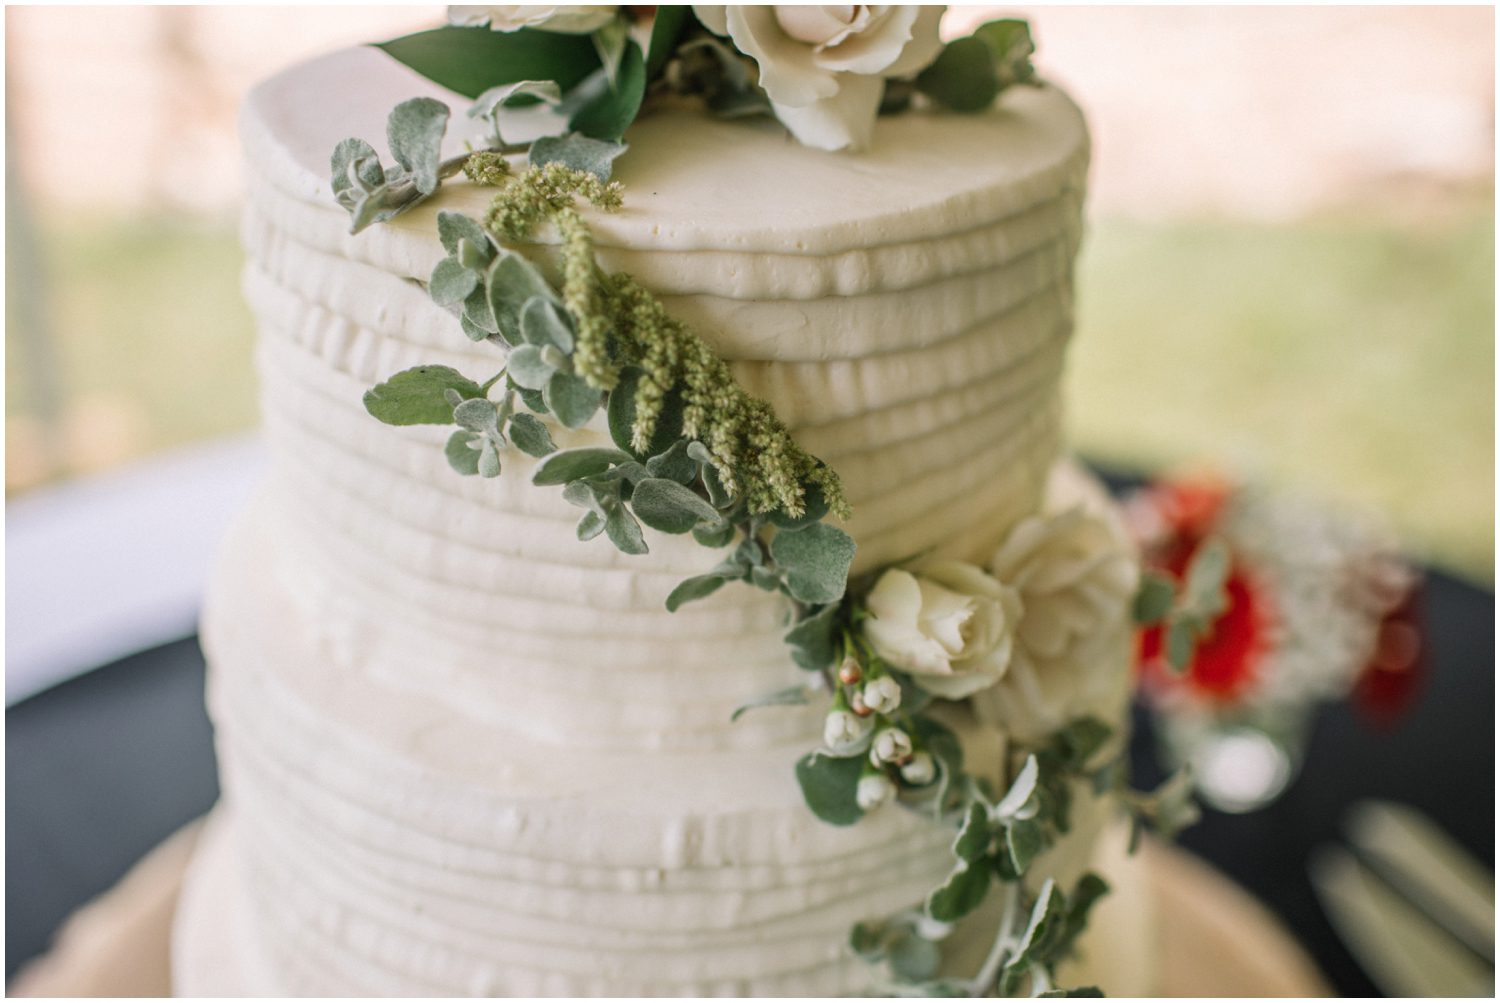 Wedding Cake, Tiered Wedding Cake, Floral Wedding Cake, Evergreen Colorado, Colorado Wedding Photographer, The Church of Transfiguration